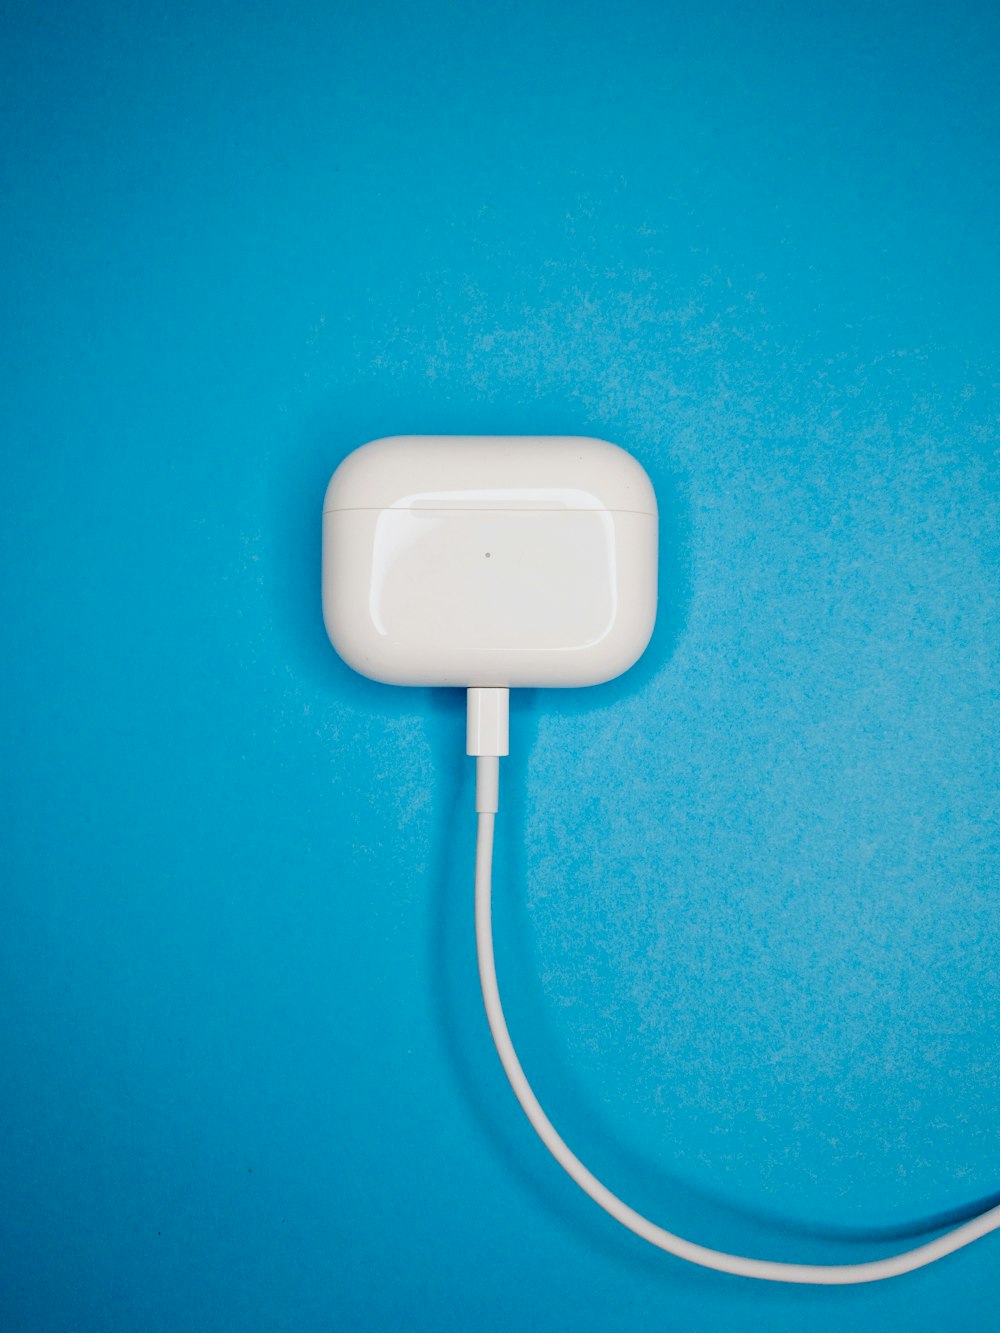 white charging adapter on blue surface